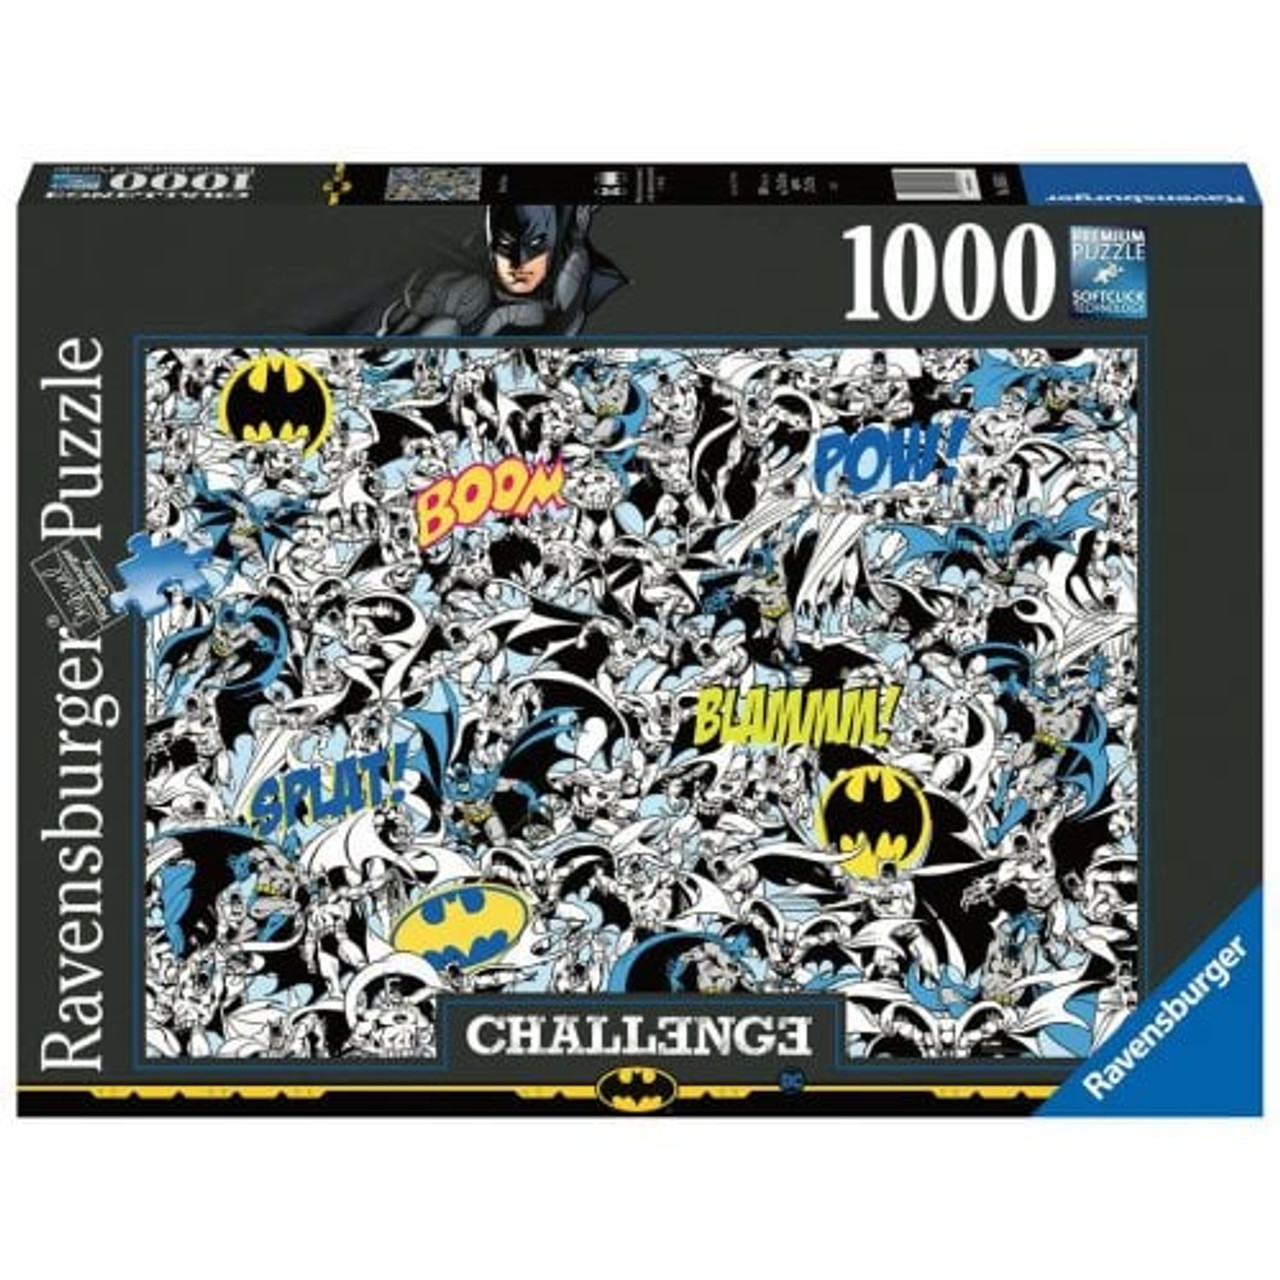 Ravensburger Pokémon 1000 Piece Challenge Jigsaw Puzzle for Adults and Kids  Age 12 Years Up